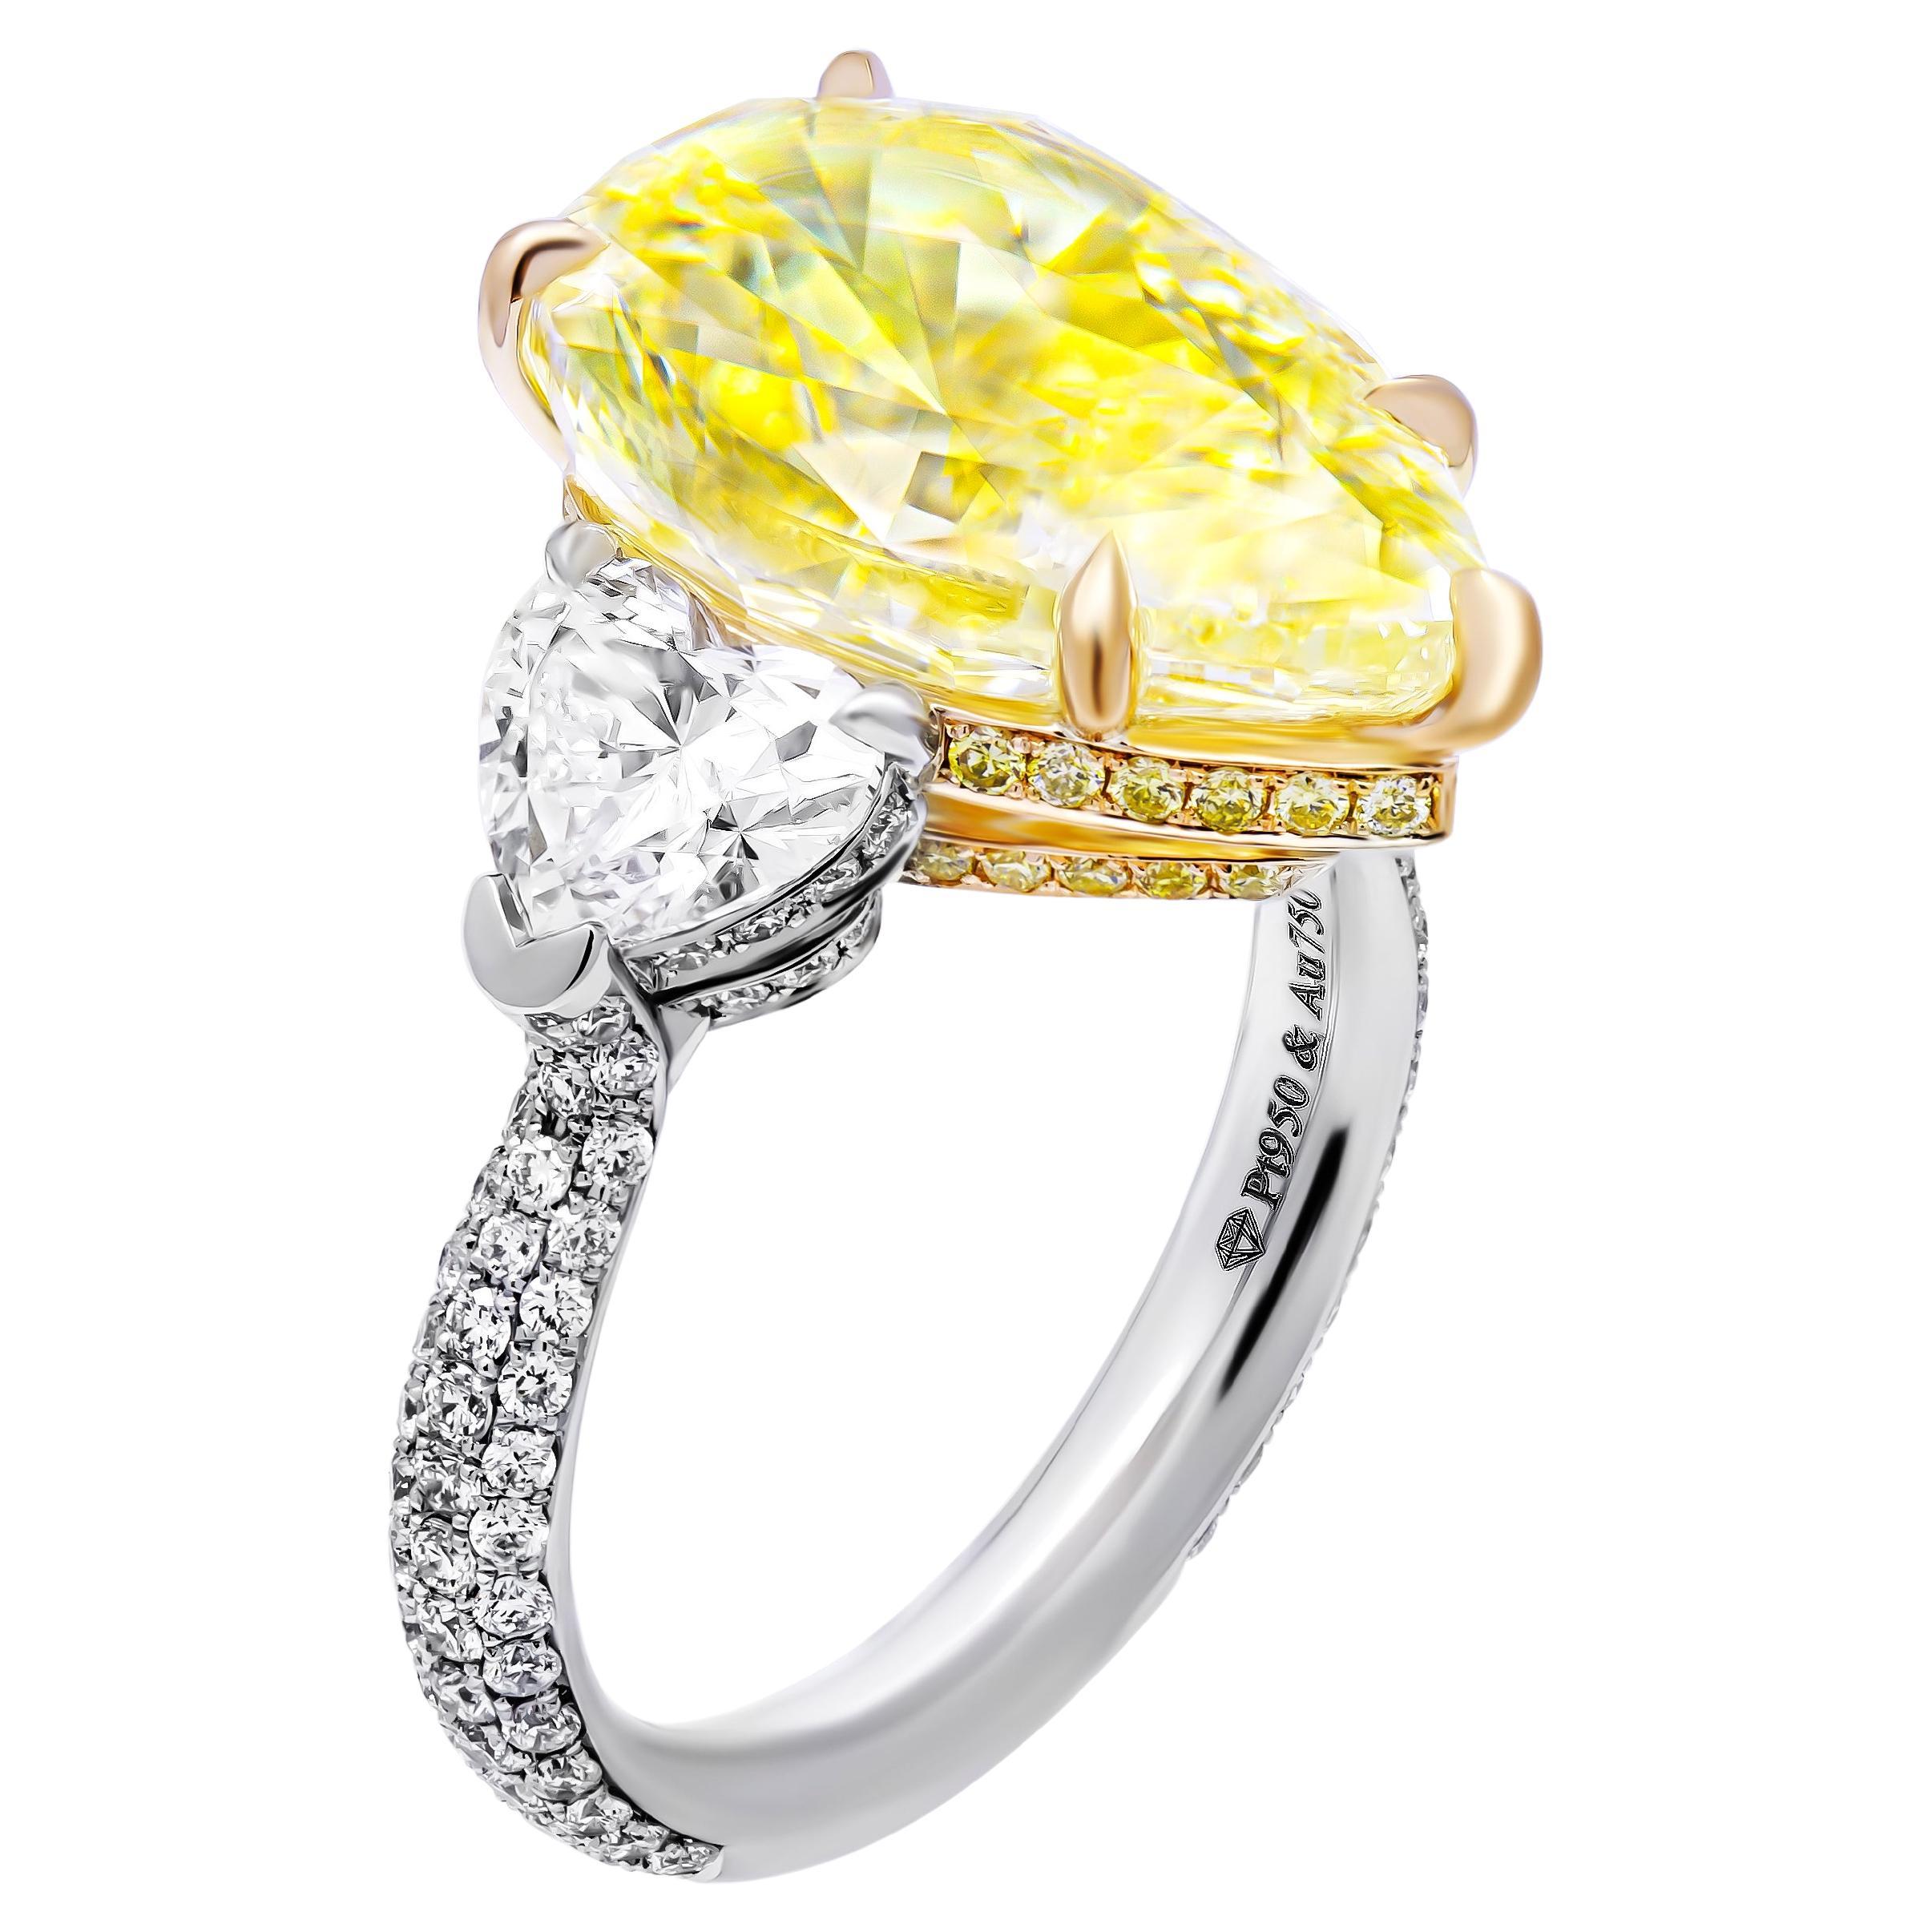 GIA Certified 3 Stone ring with 7.78ct Fancy Yellow Pear Shape Diamond For Sale